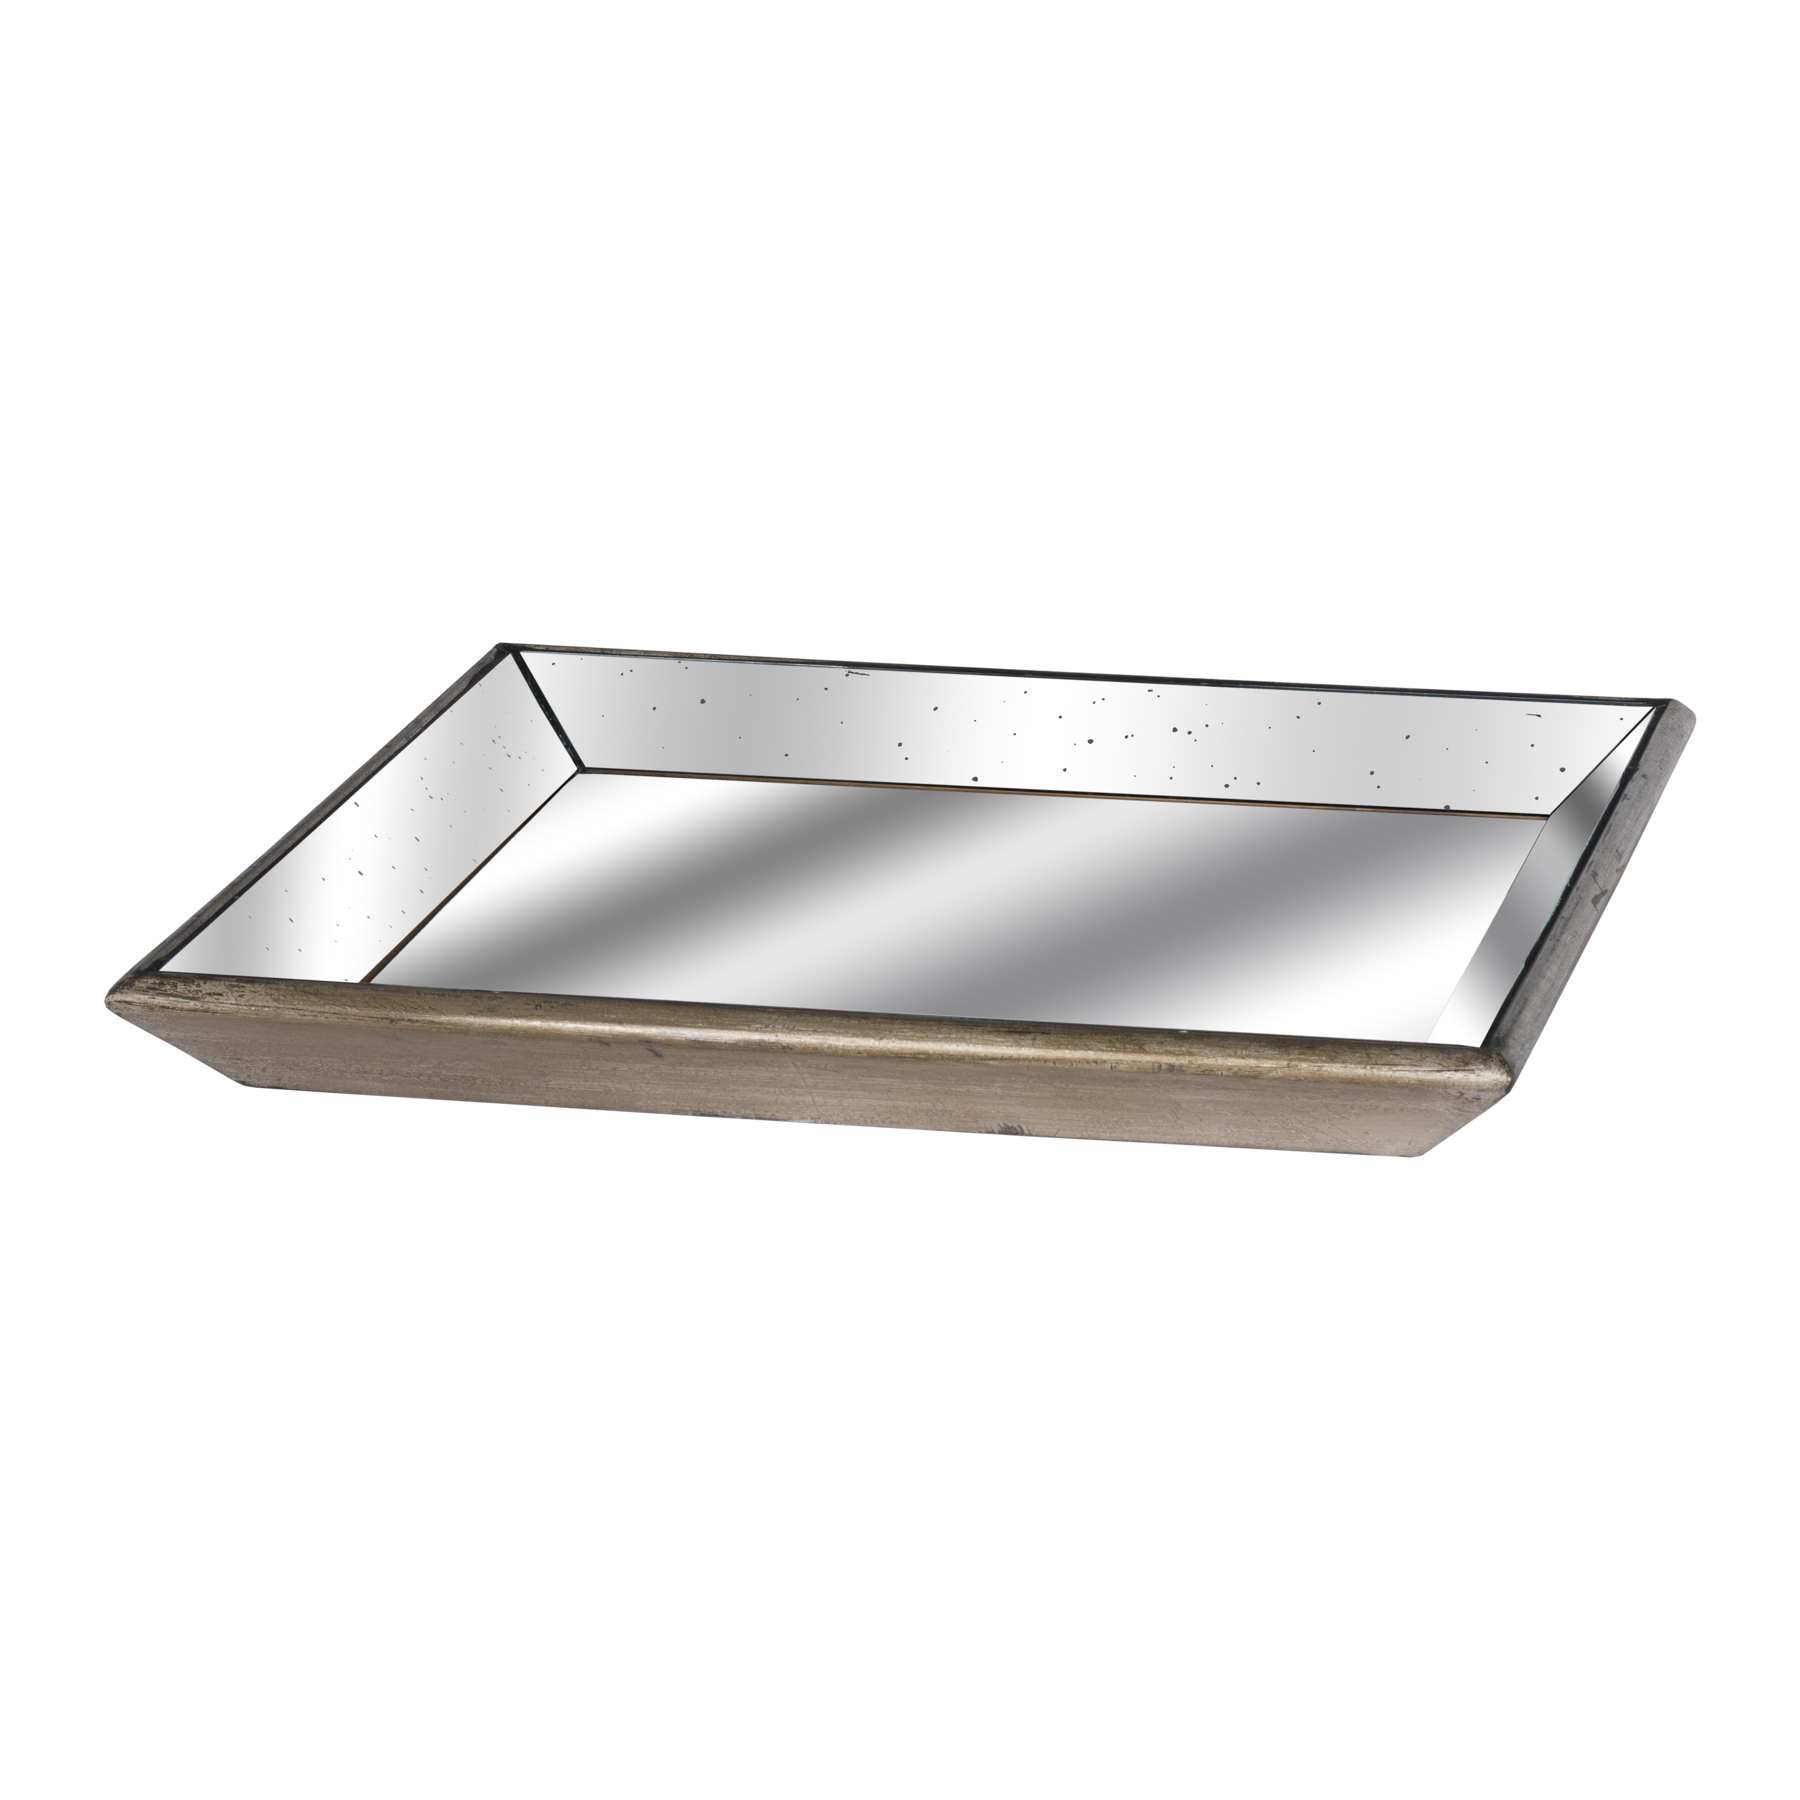 Astor Distressed Mirrored Square Tray W/Wooden Detailing Lge - Image 1